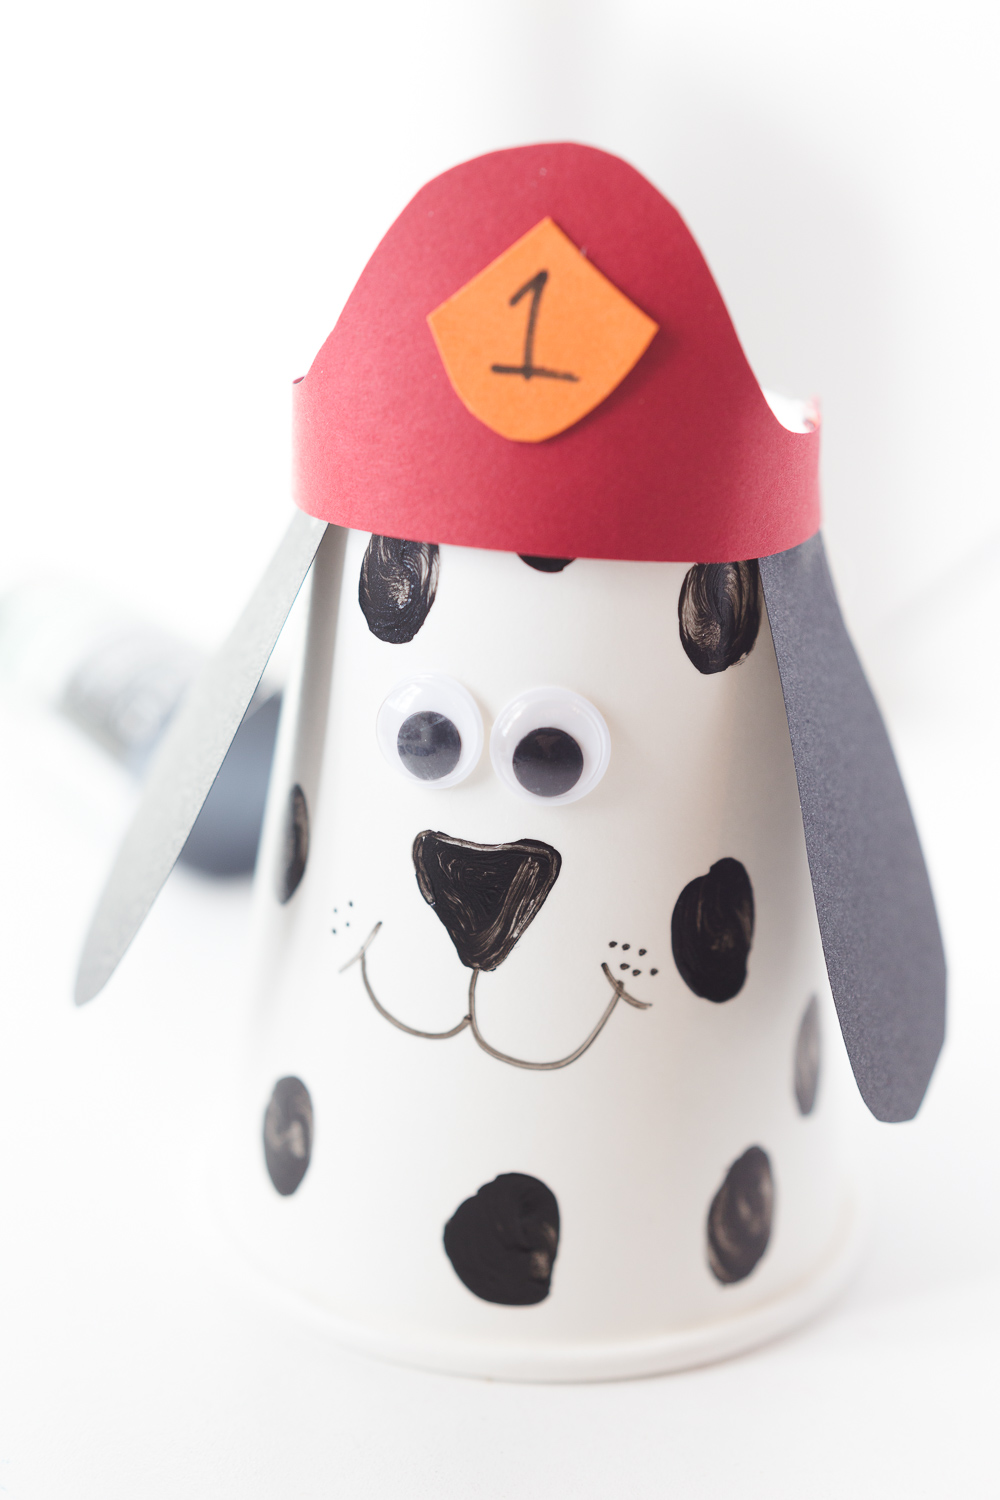 Firefighter Dalmatian Kids Craft: a fun and simple fire prevention craft for the kids! Great classroom idea for fire prevention week! 